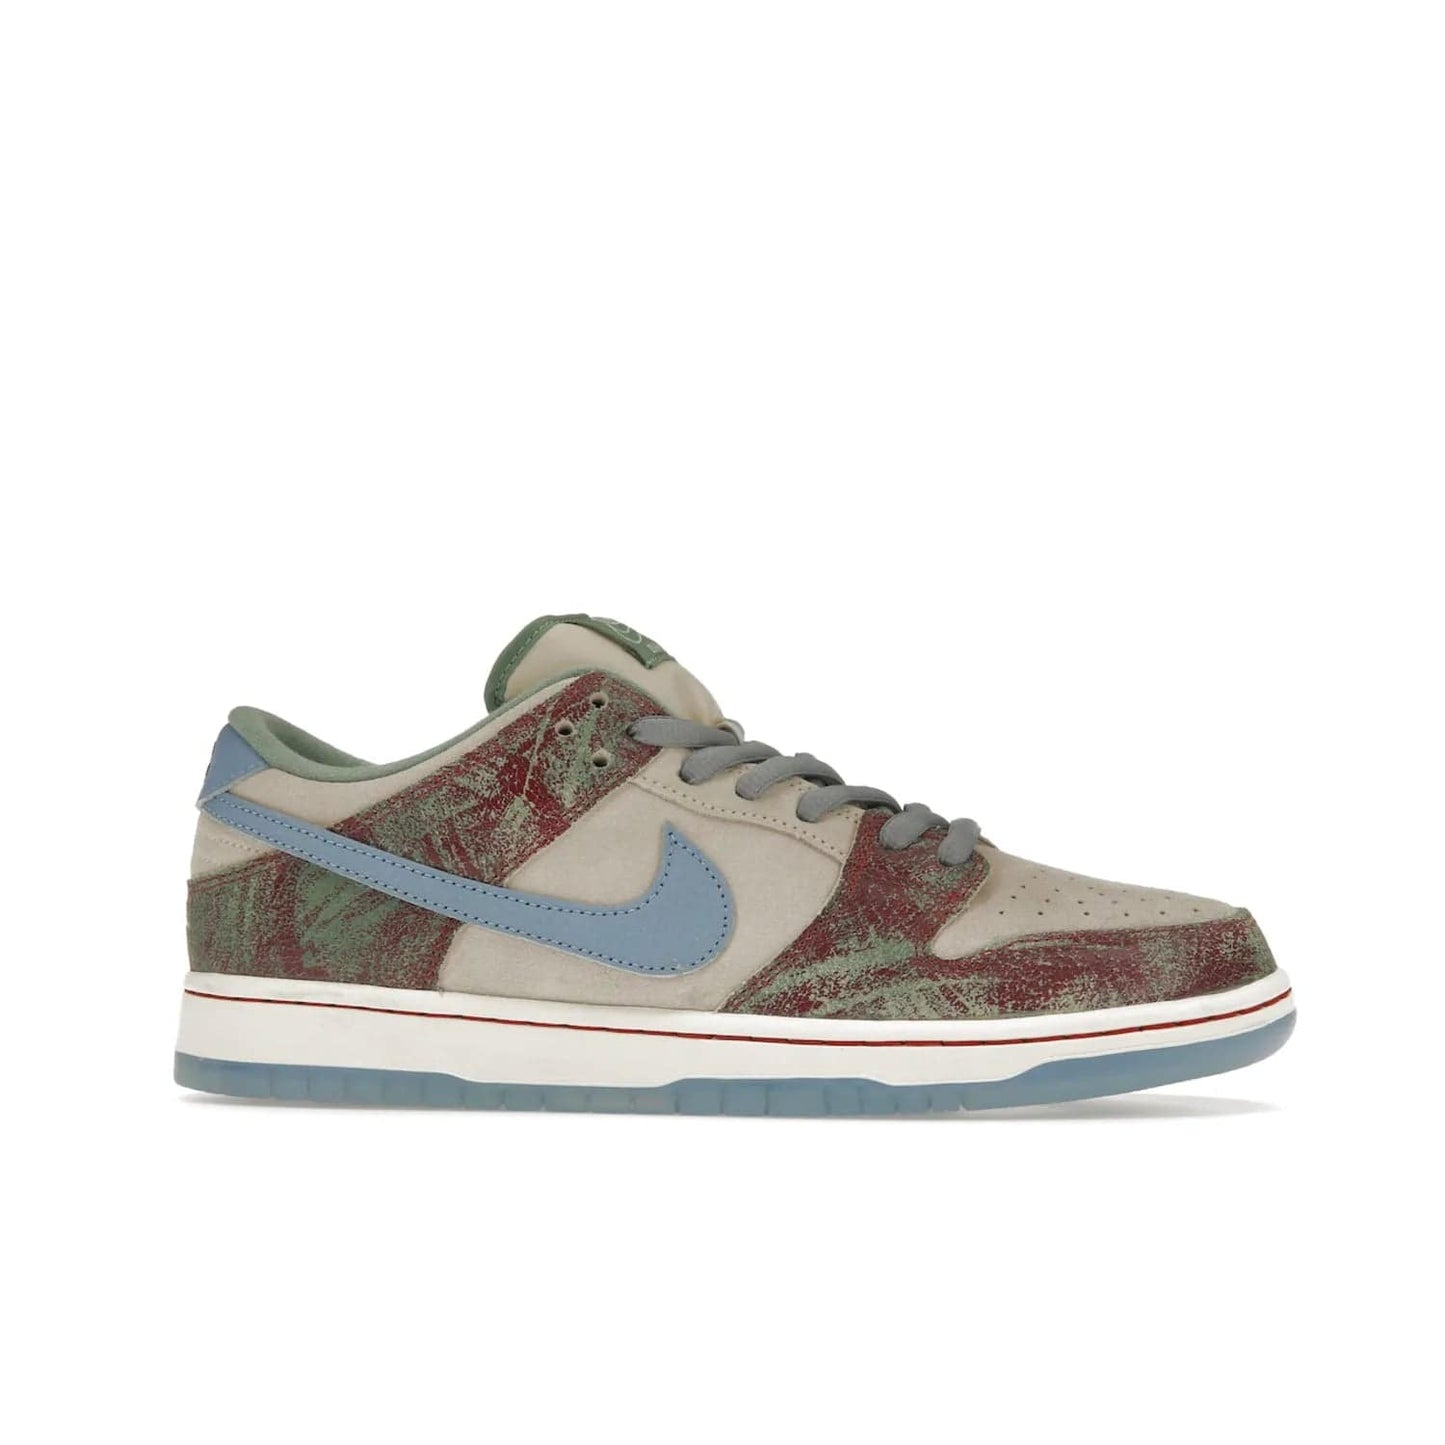 Nike SB Dunk Low Crenshaw Skate Club - Image 2 - Only at www.BallersClubKickz.com - Introducing the Nike SB Dunk Low Crenshaw Skate Club! Classic skate shoes with Sail and Light Blue upper, Cedar accents, padded collars and superior grip for comfortable, stable performance and style. Ideal for any skate session.